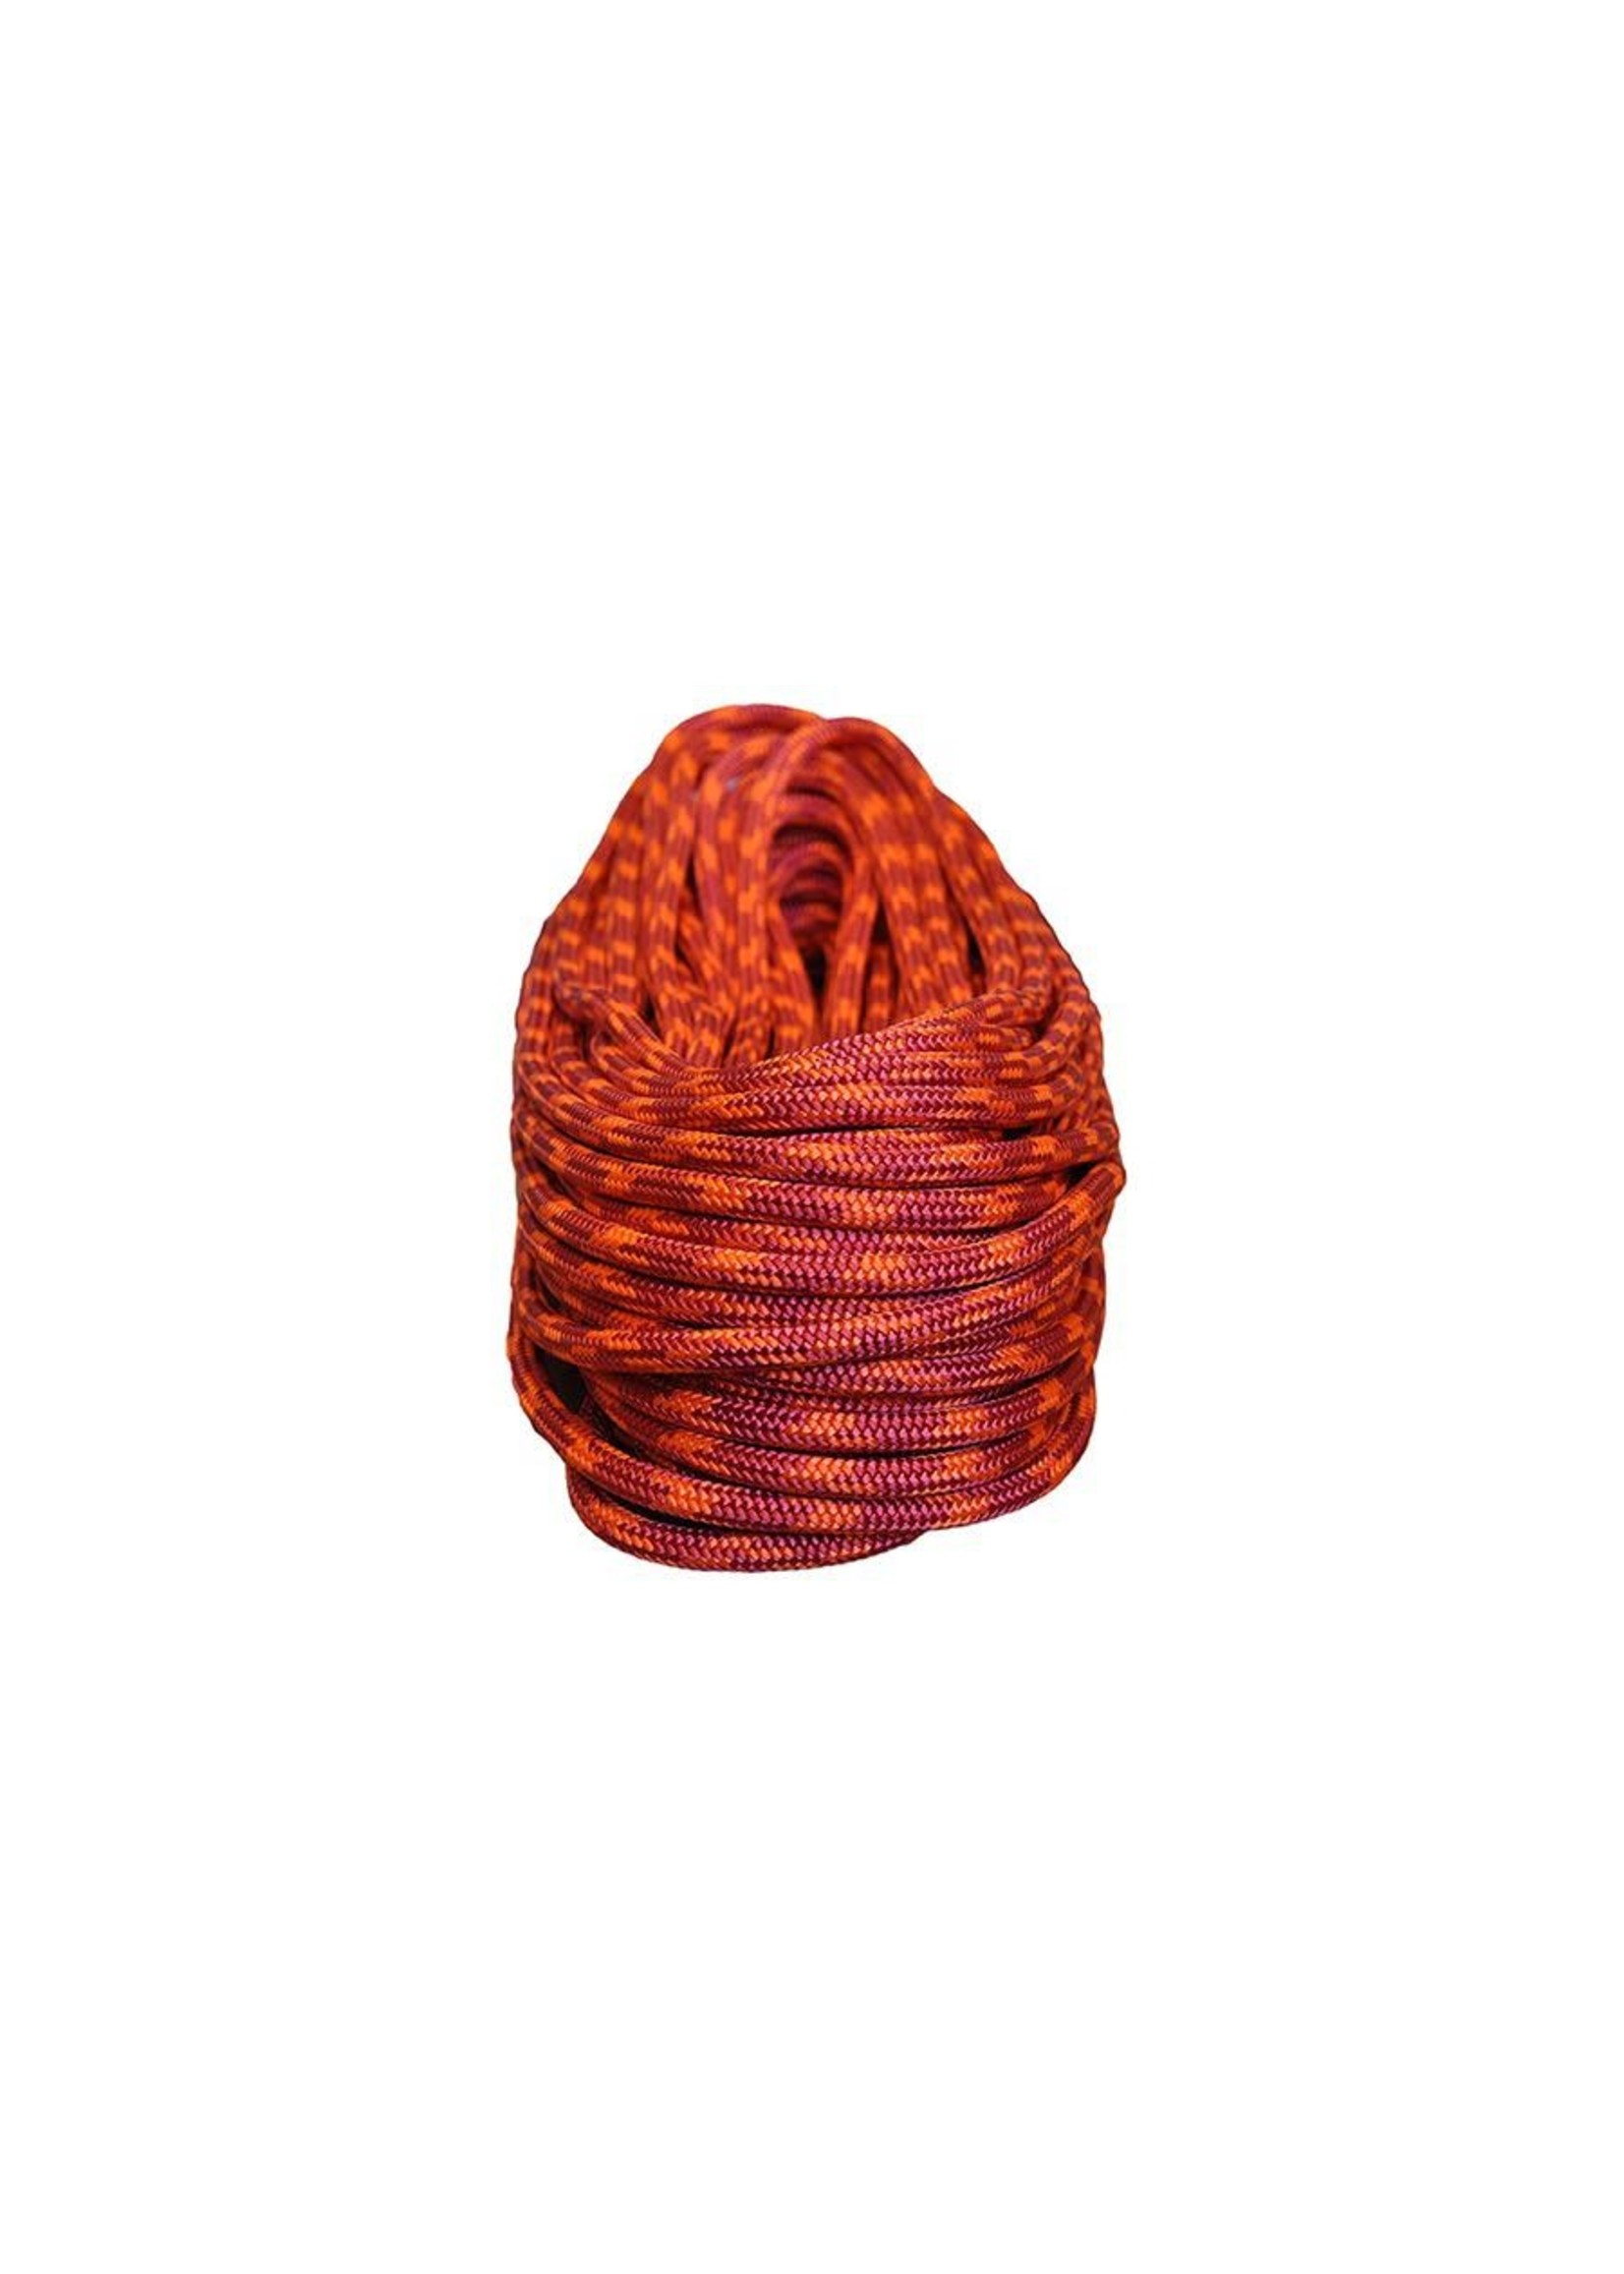 All Gear Inc. Cherry Bomb 7/16" (11.5mm) x 150' 24 Strand Polyester Double Braid Red And Neon Orange 7,000Lbs ABS